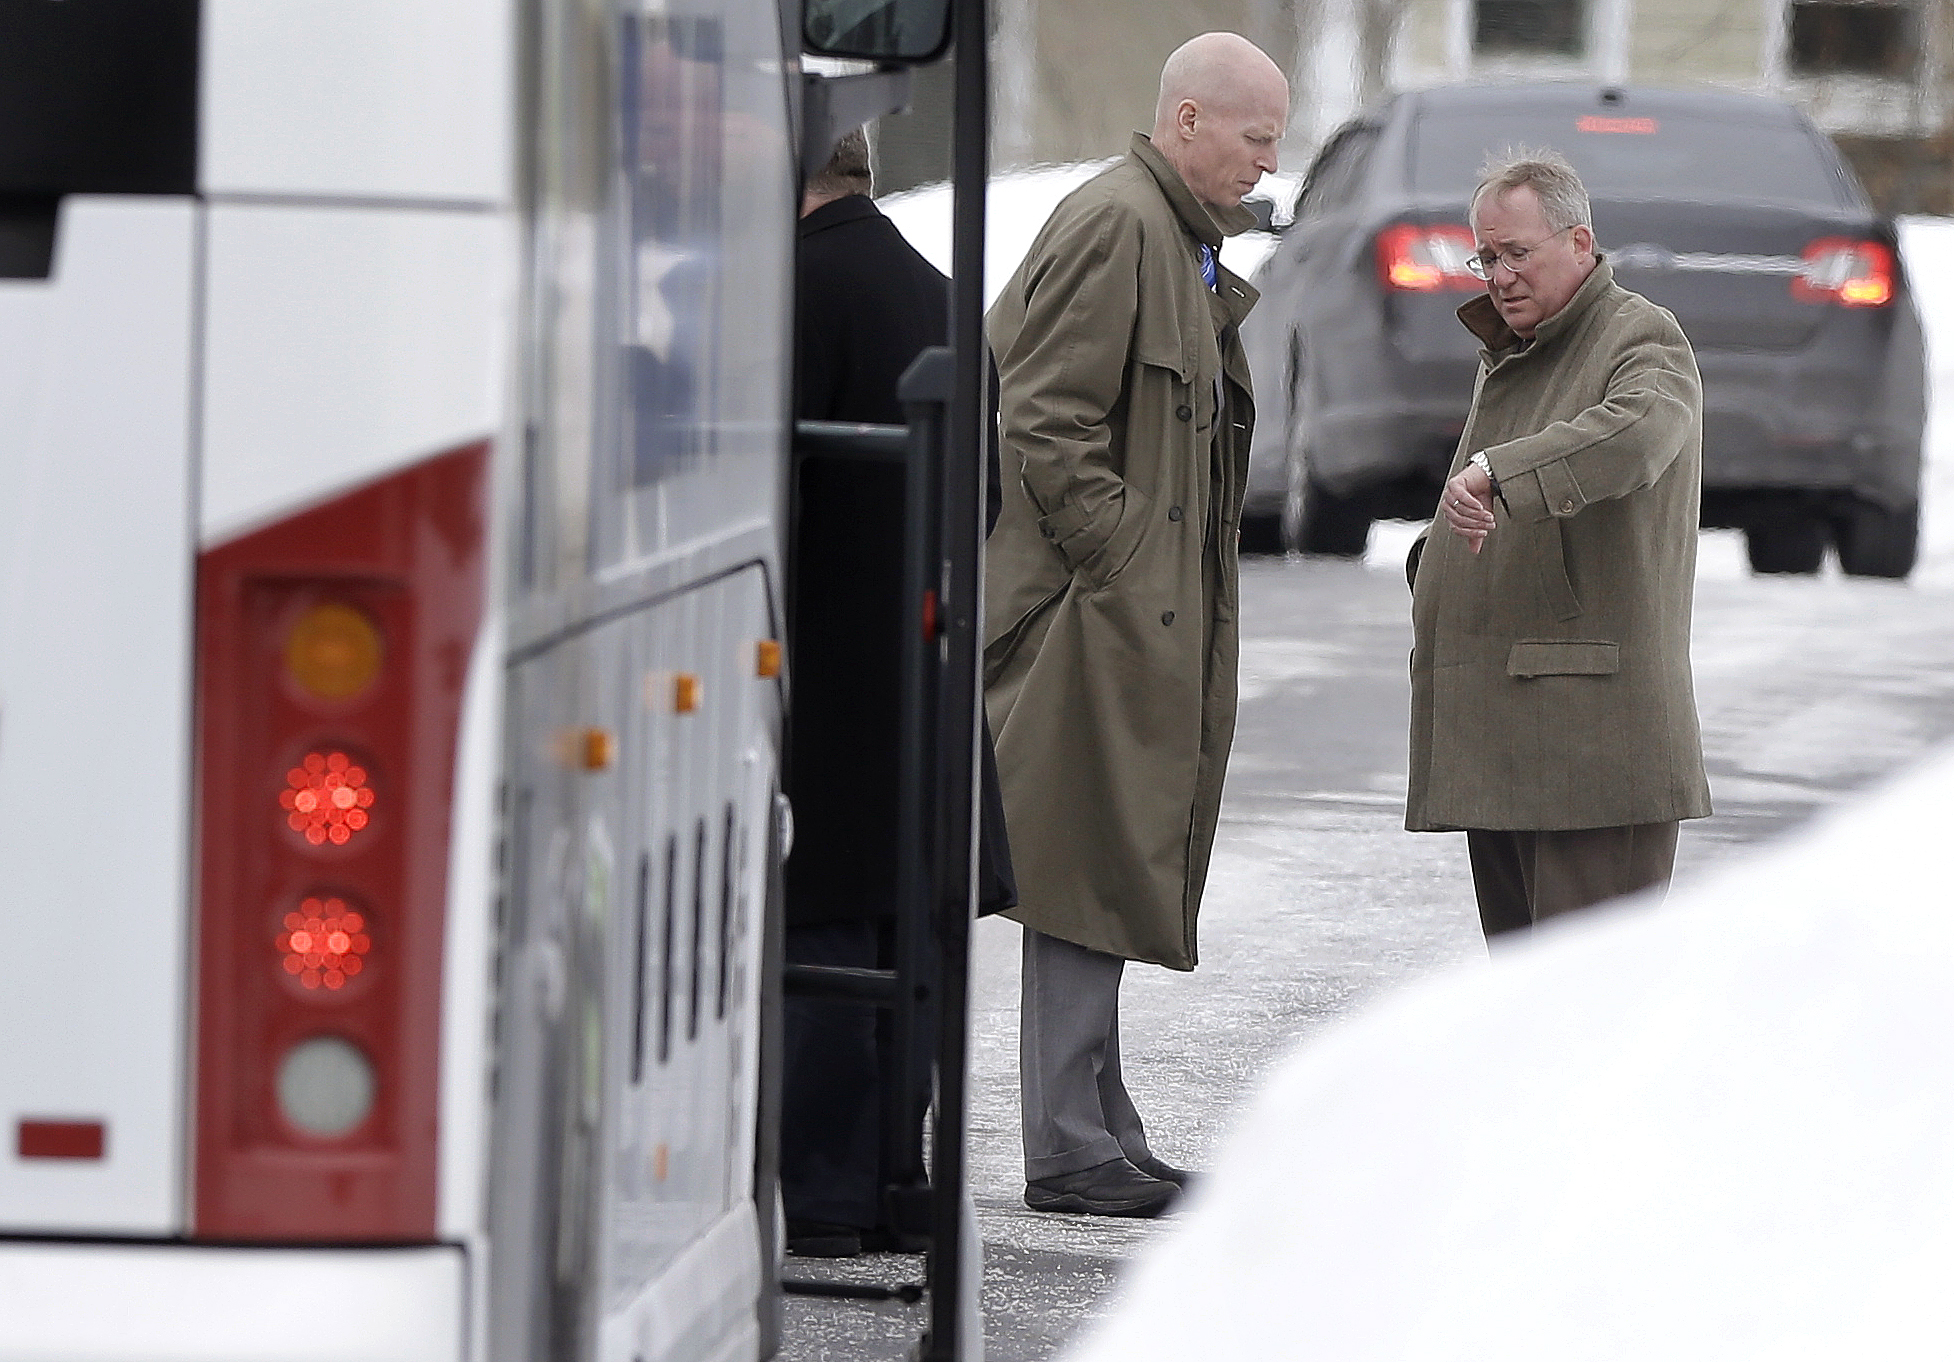 PHOTO: Massachusetts assistant District Attorneys William McCauley, left, and Patrick Bomberg, right, prepare to depart the North Attleborough, Mass., home of former New England Patriots football player Aaron Hernandez, Feb. 6, 2015.